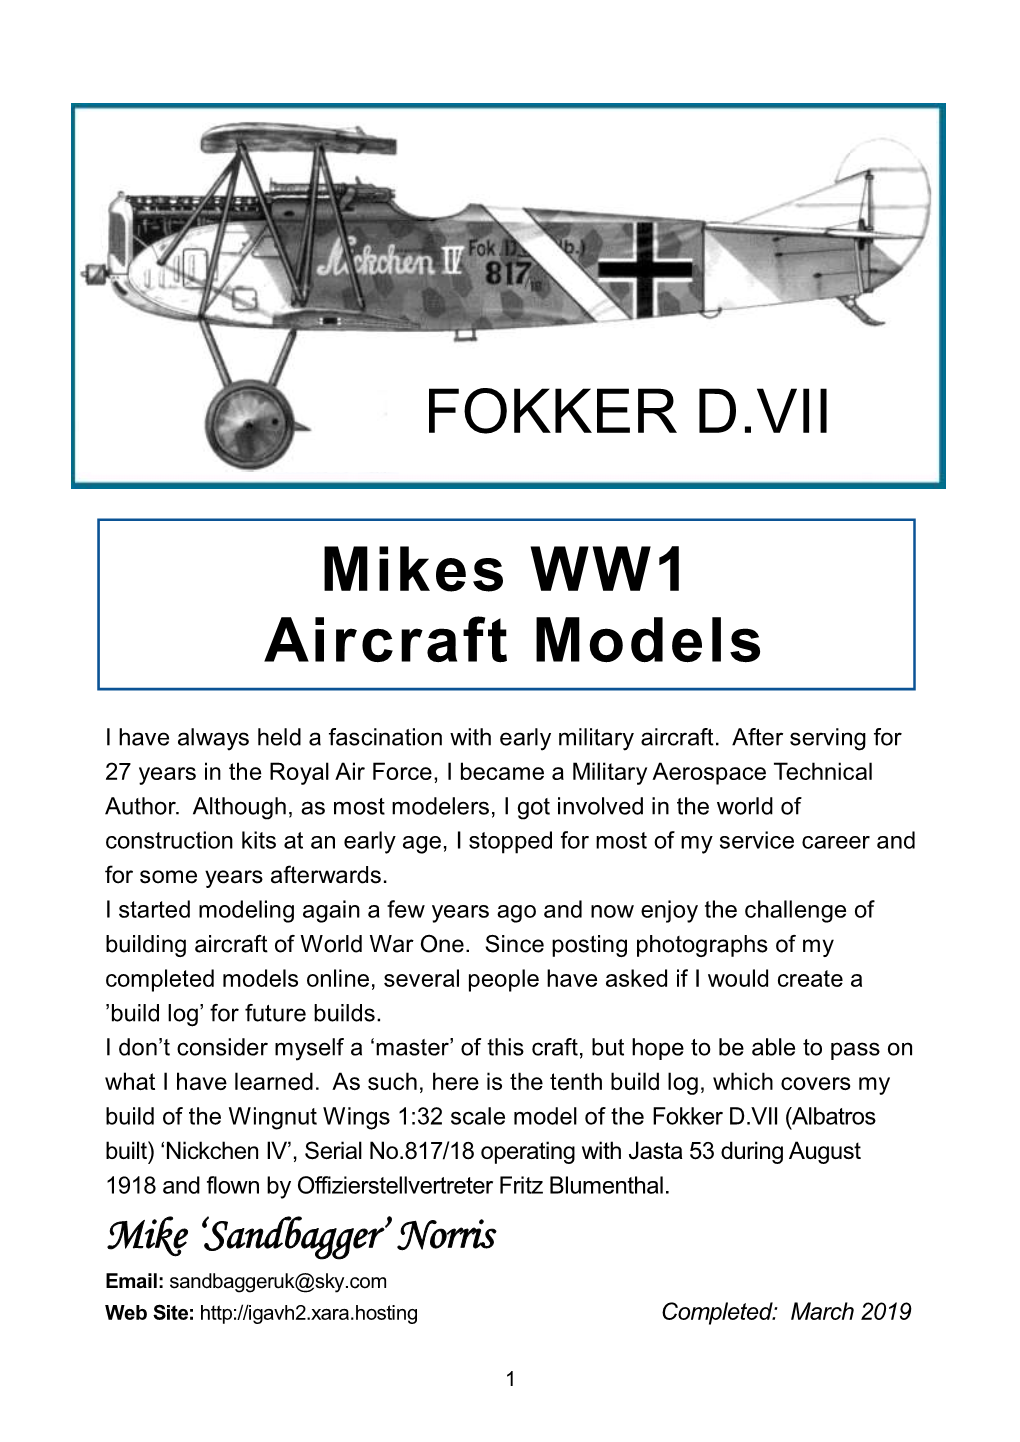 Mikes WW1 Aircraft Models FOKKER D.VII